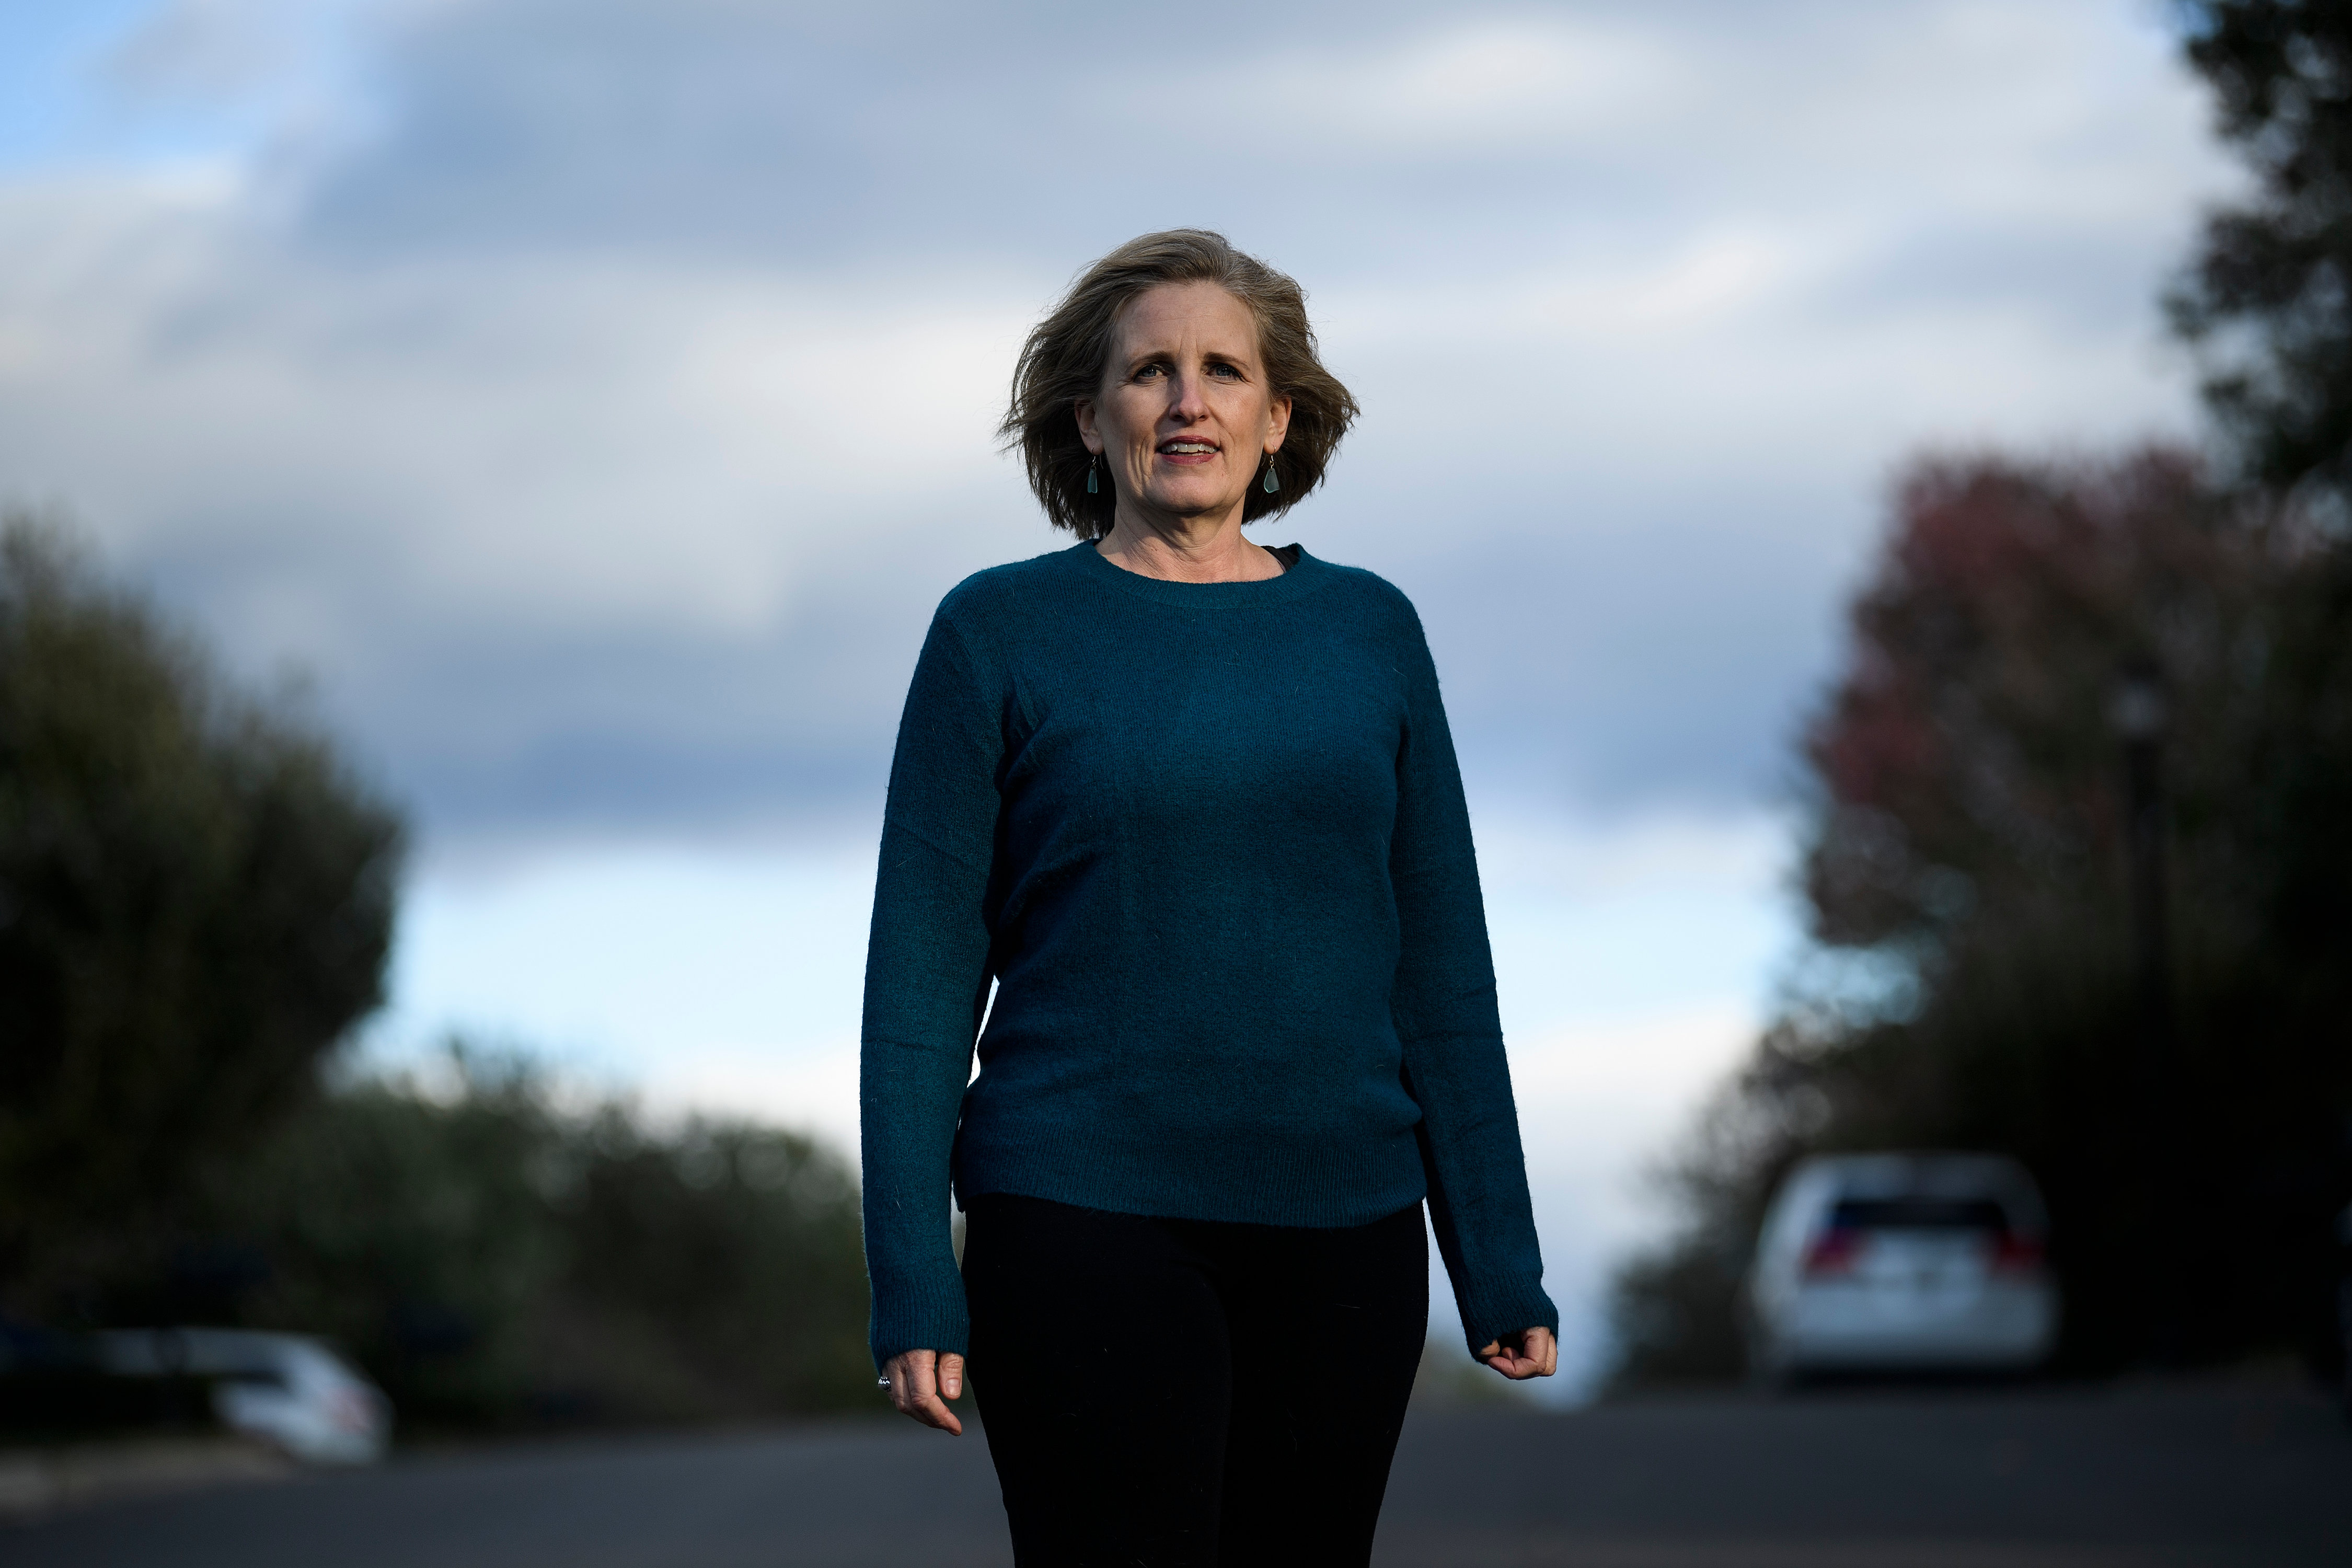 Juli Briskman, who is projected to become supervisor for the Algonkian District in Loudoun County, poses on Oct.17, 2019, in Sterling, Virginia. 